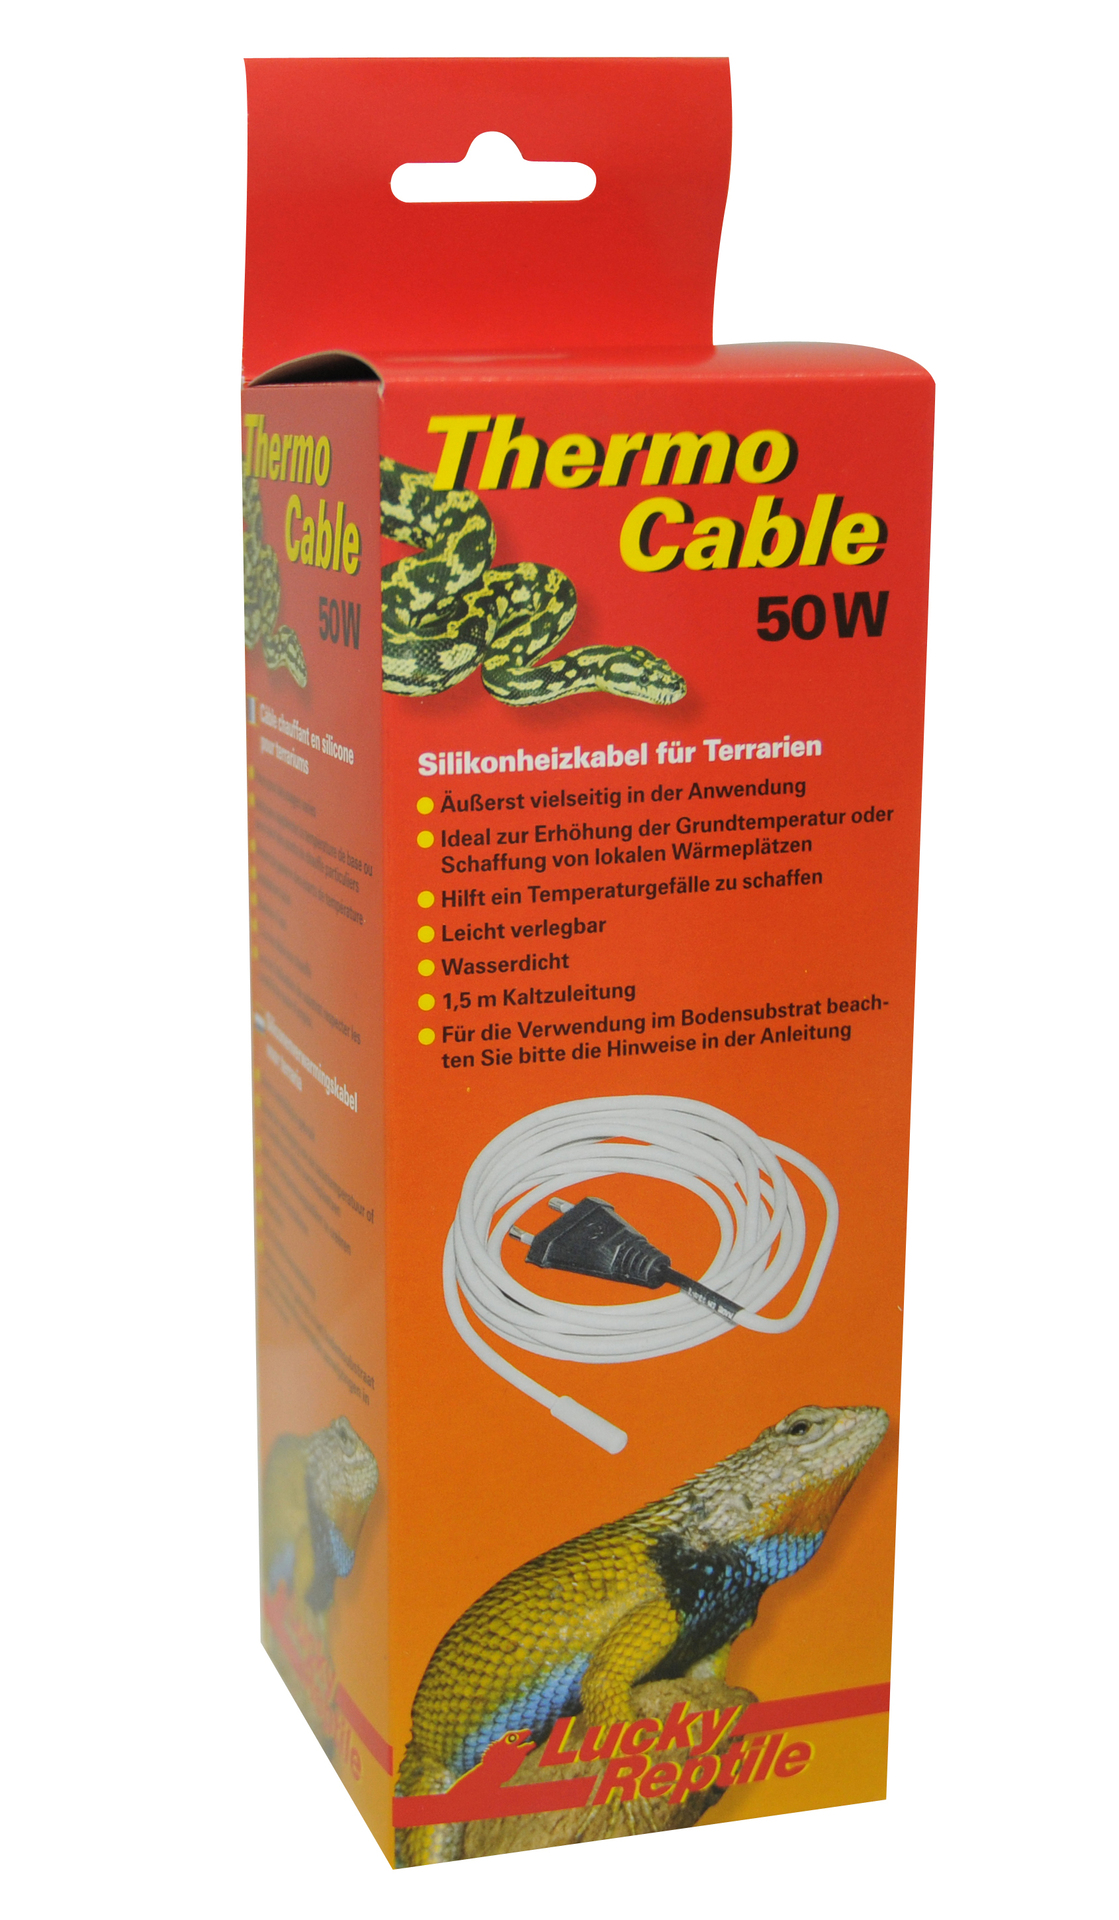 Peter Hoch Thermo Cable